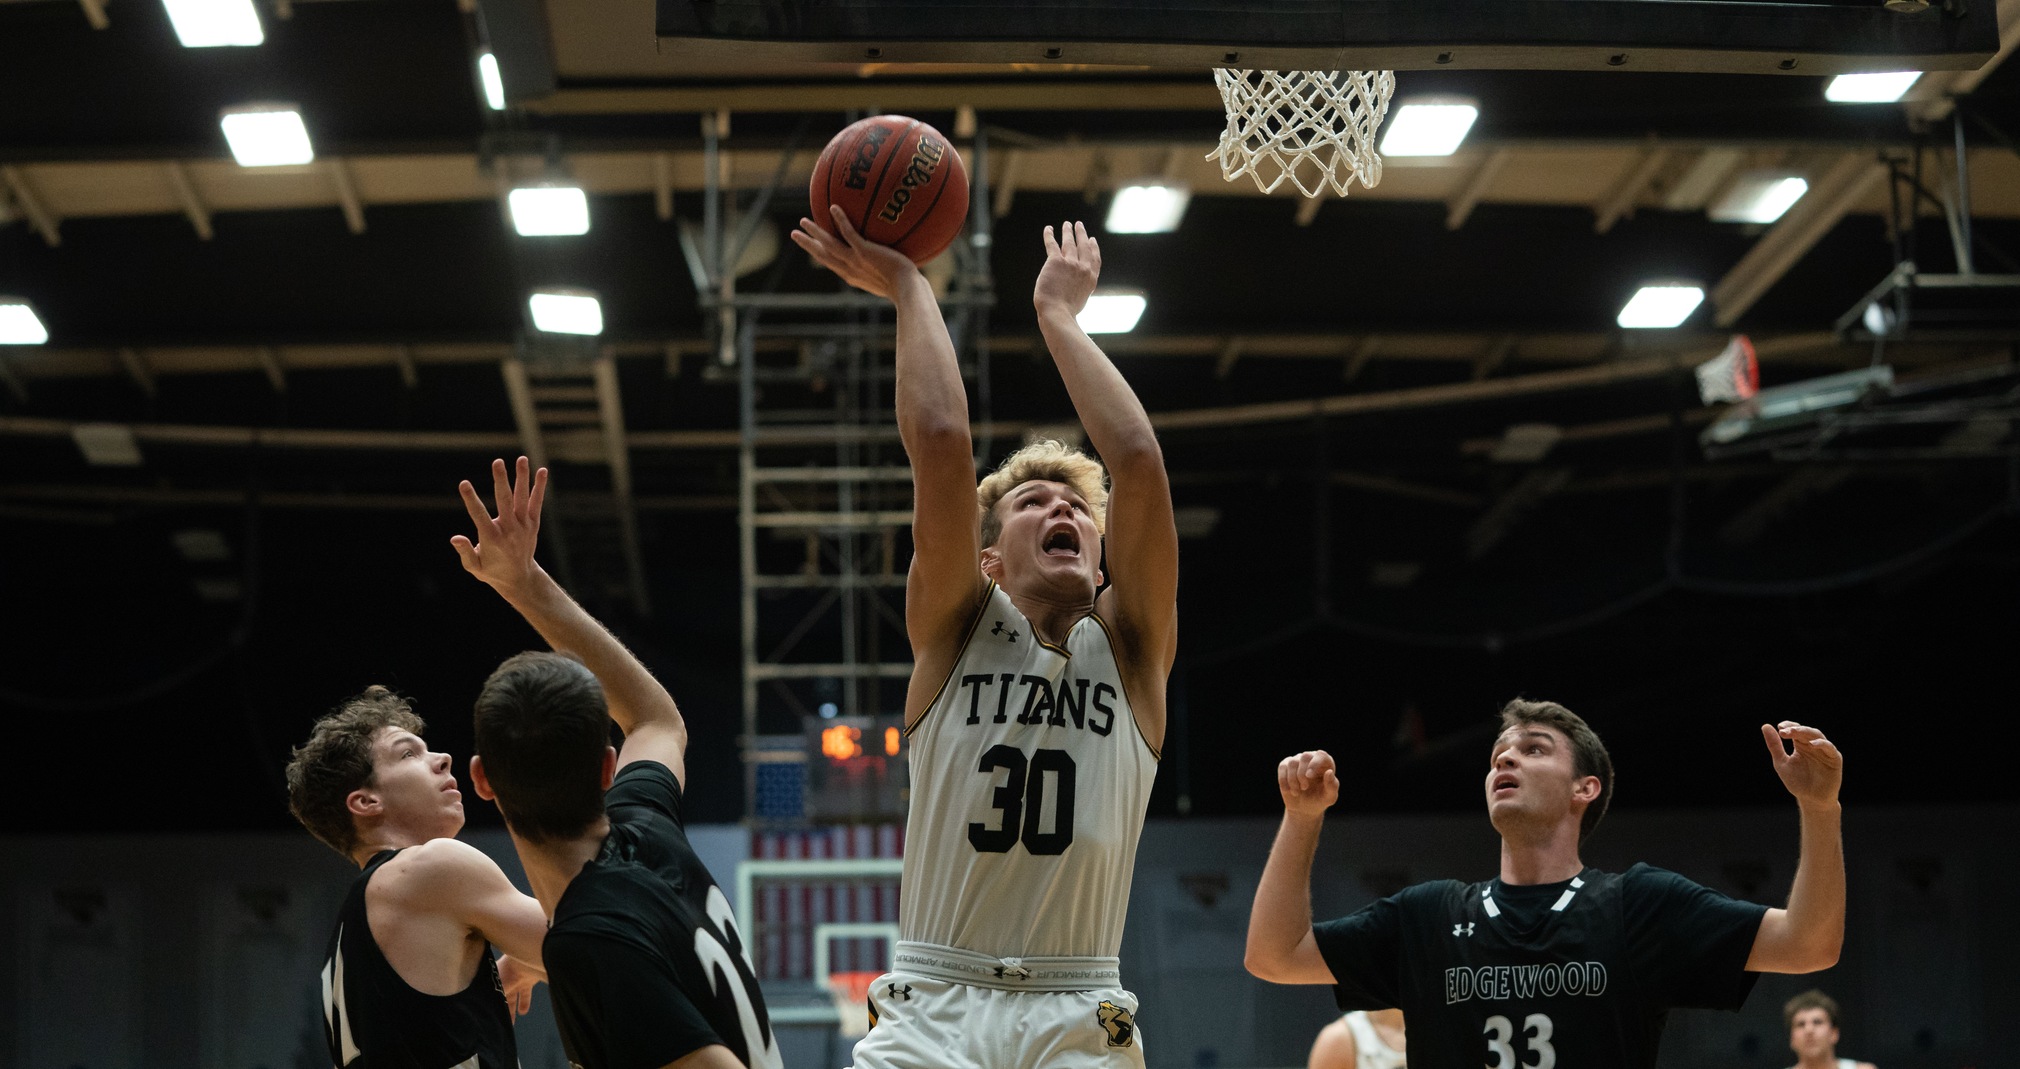 Levi Borchert totaled 12 points and 10 rebounds against the Eagles for his first career double-double.